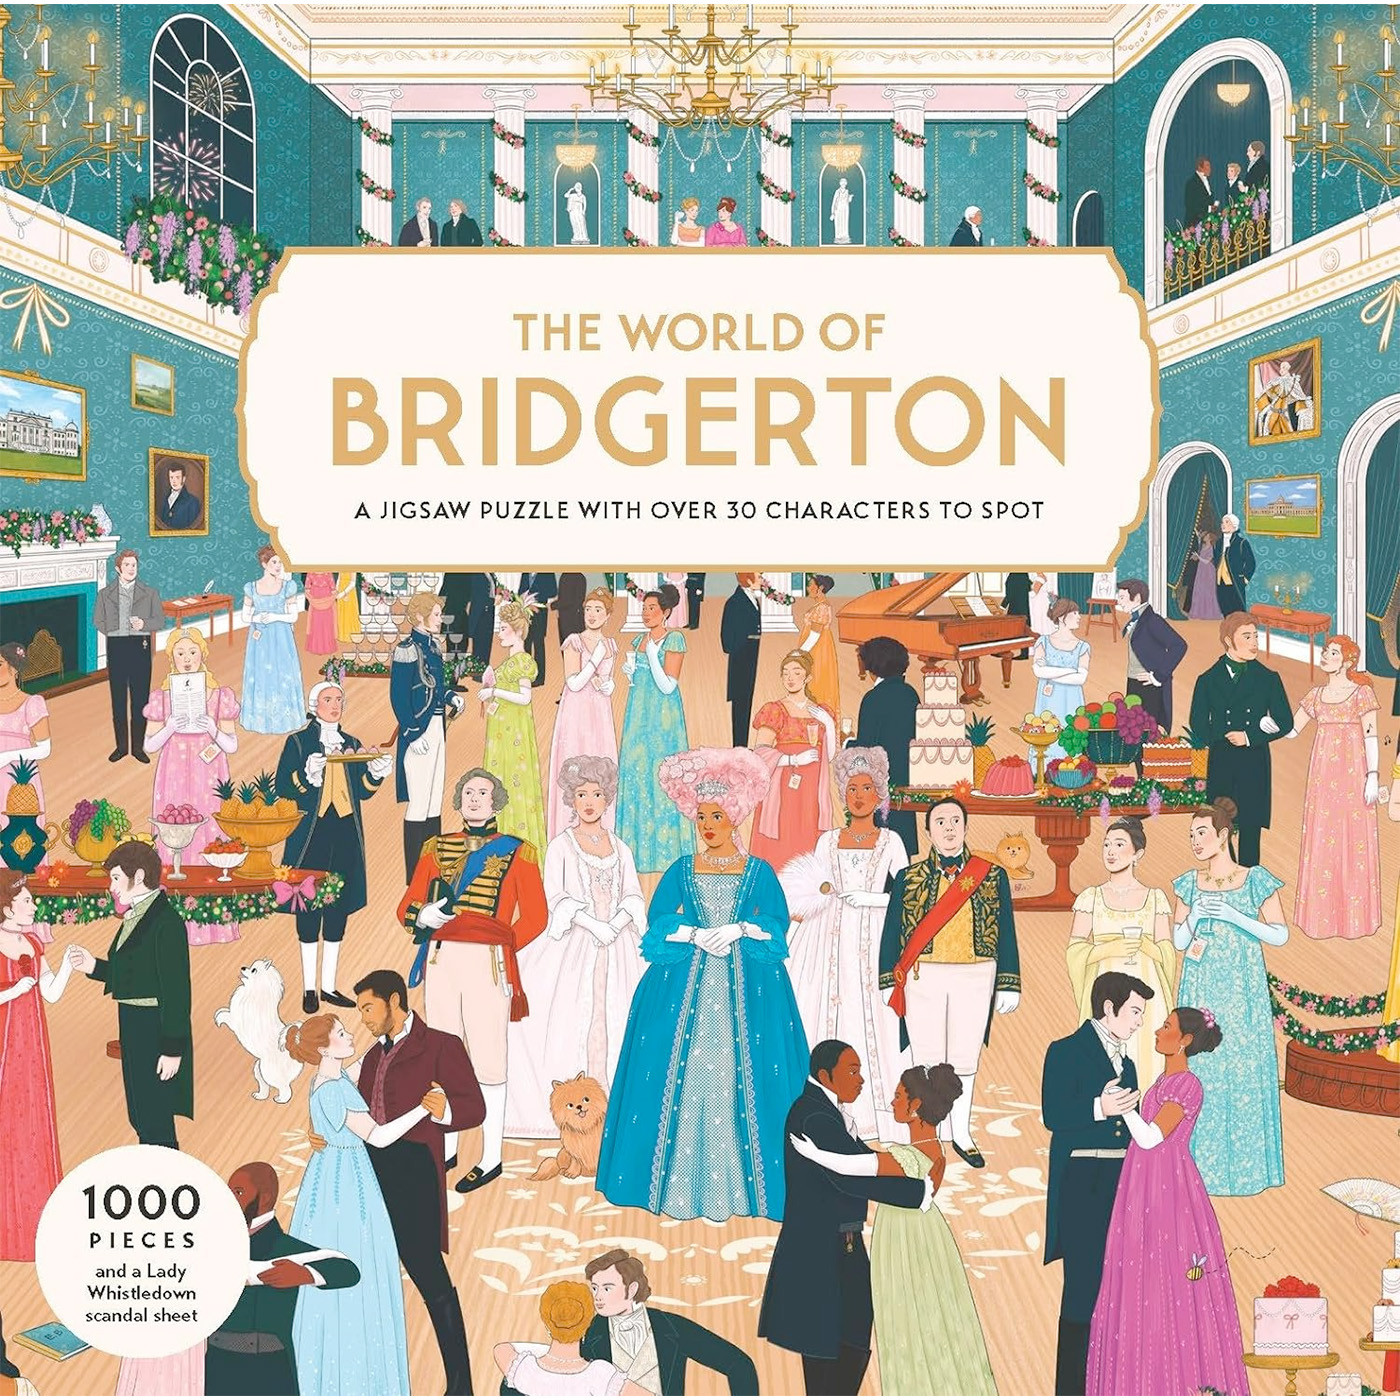 The World of Bridgerton: a jigsaw puzzle with over 30 characters to spot